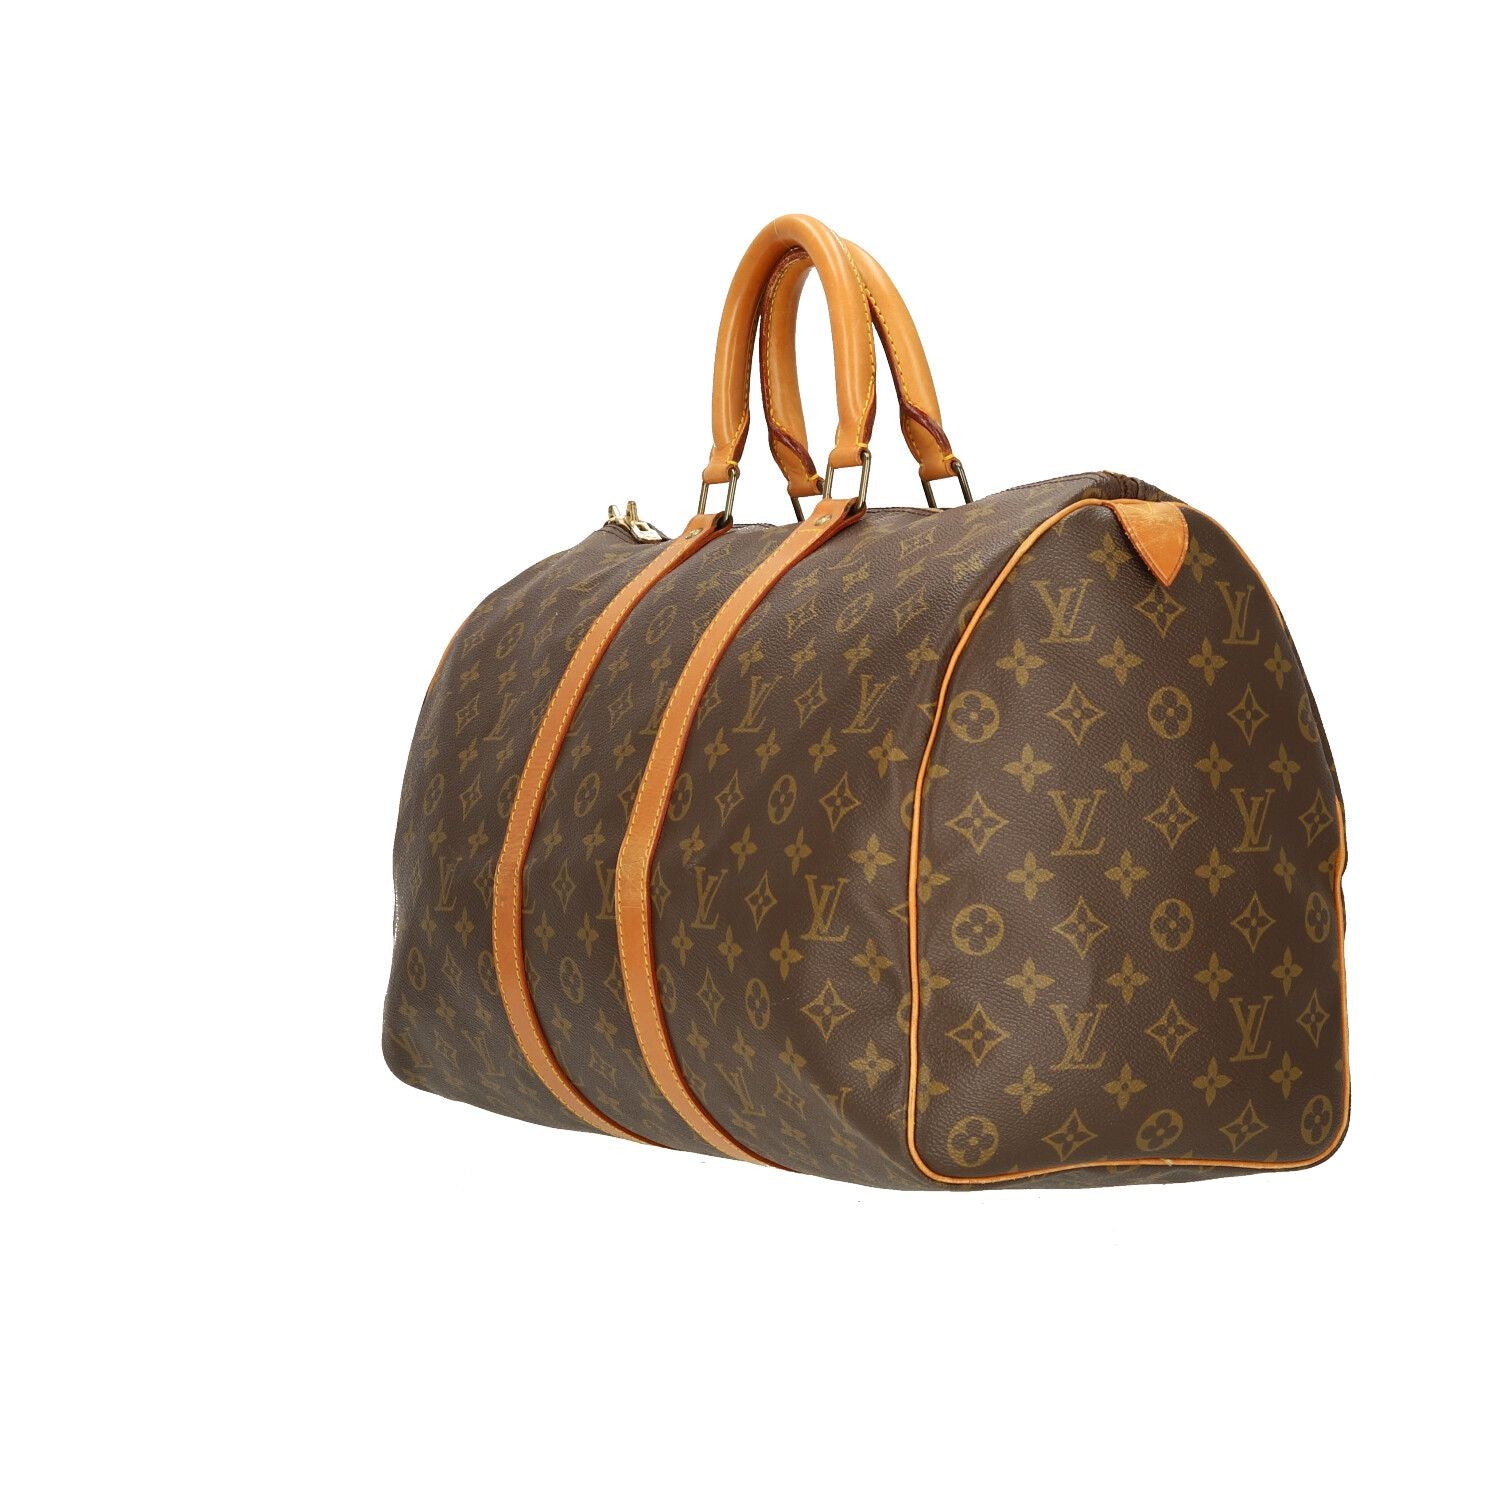 Louis Vuitton -------- for $23,144 for sale from a Private Seller on  Chrono24